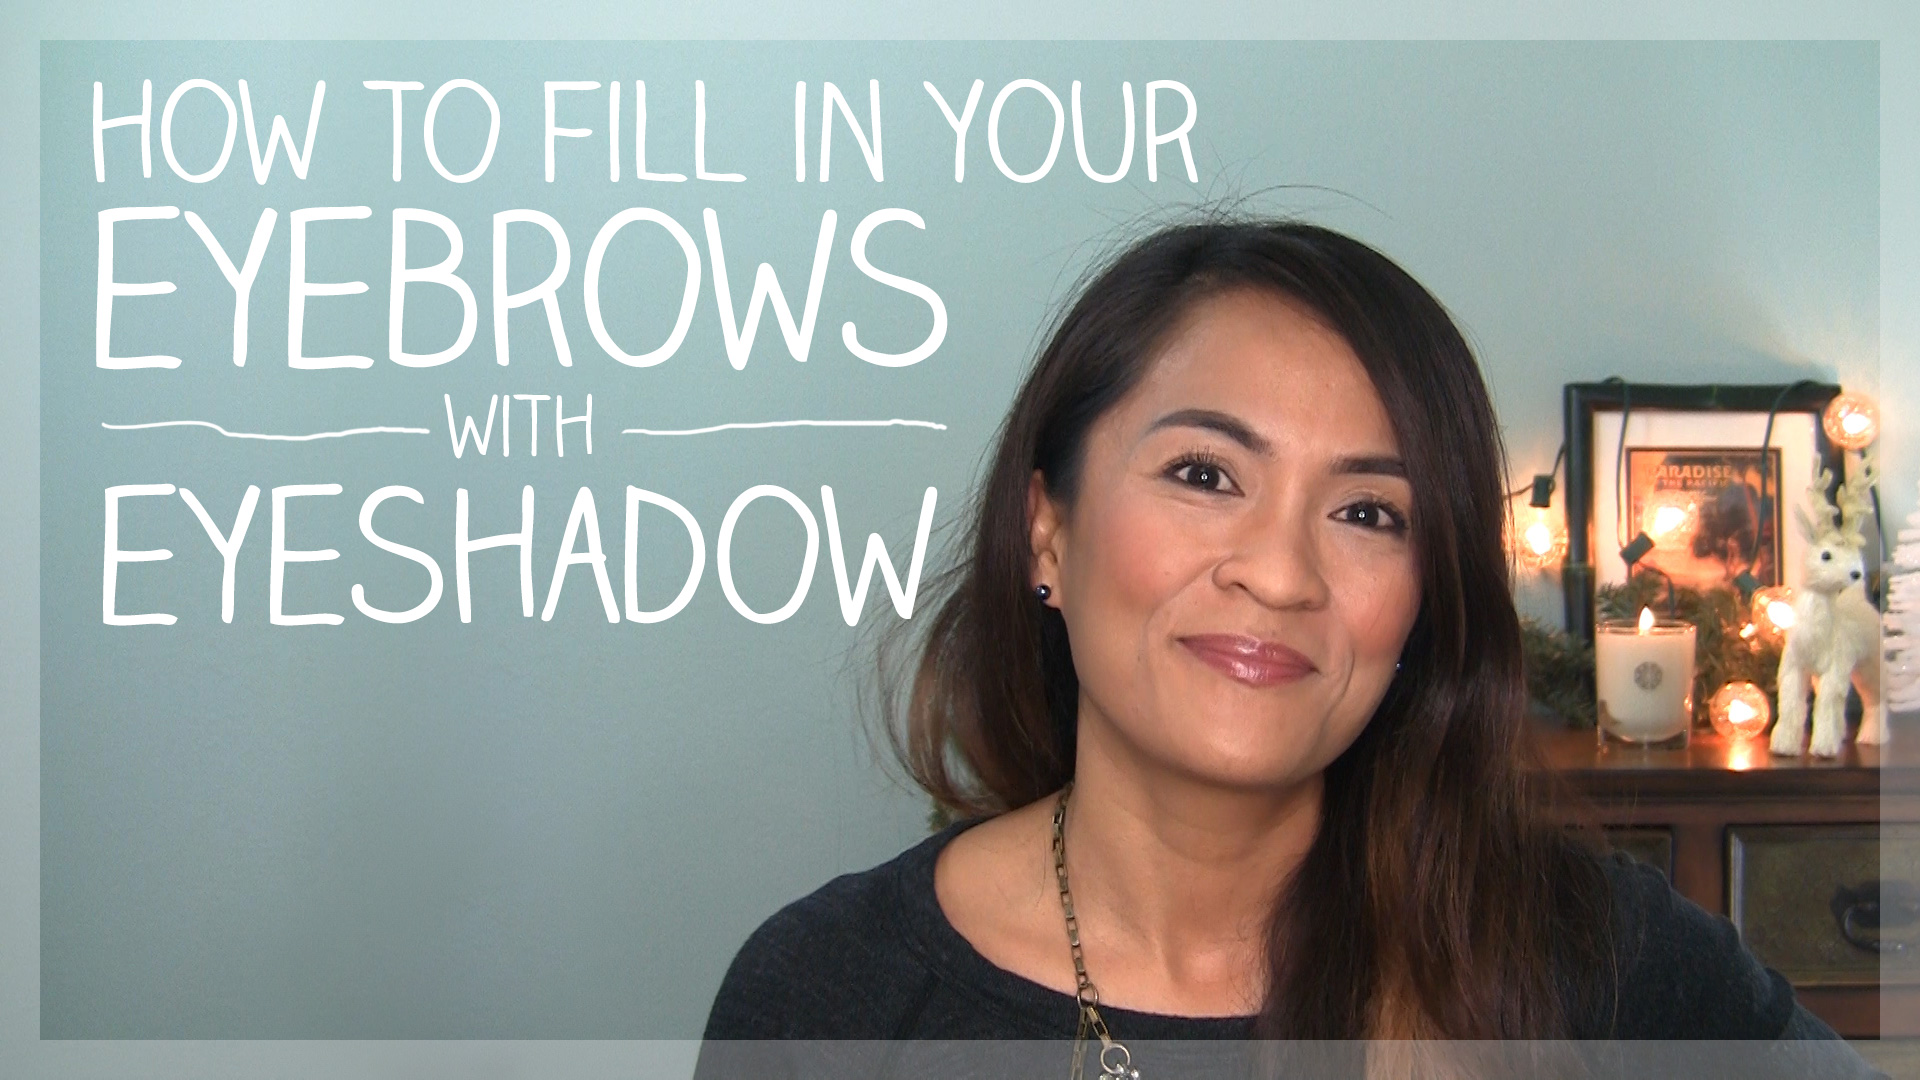 How To Fill in Your Eyebrows With Eyeshadow - Makeup and ...